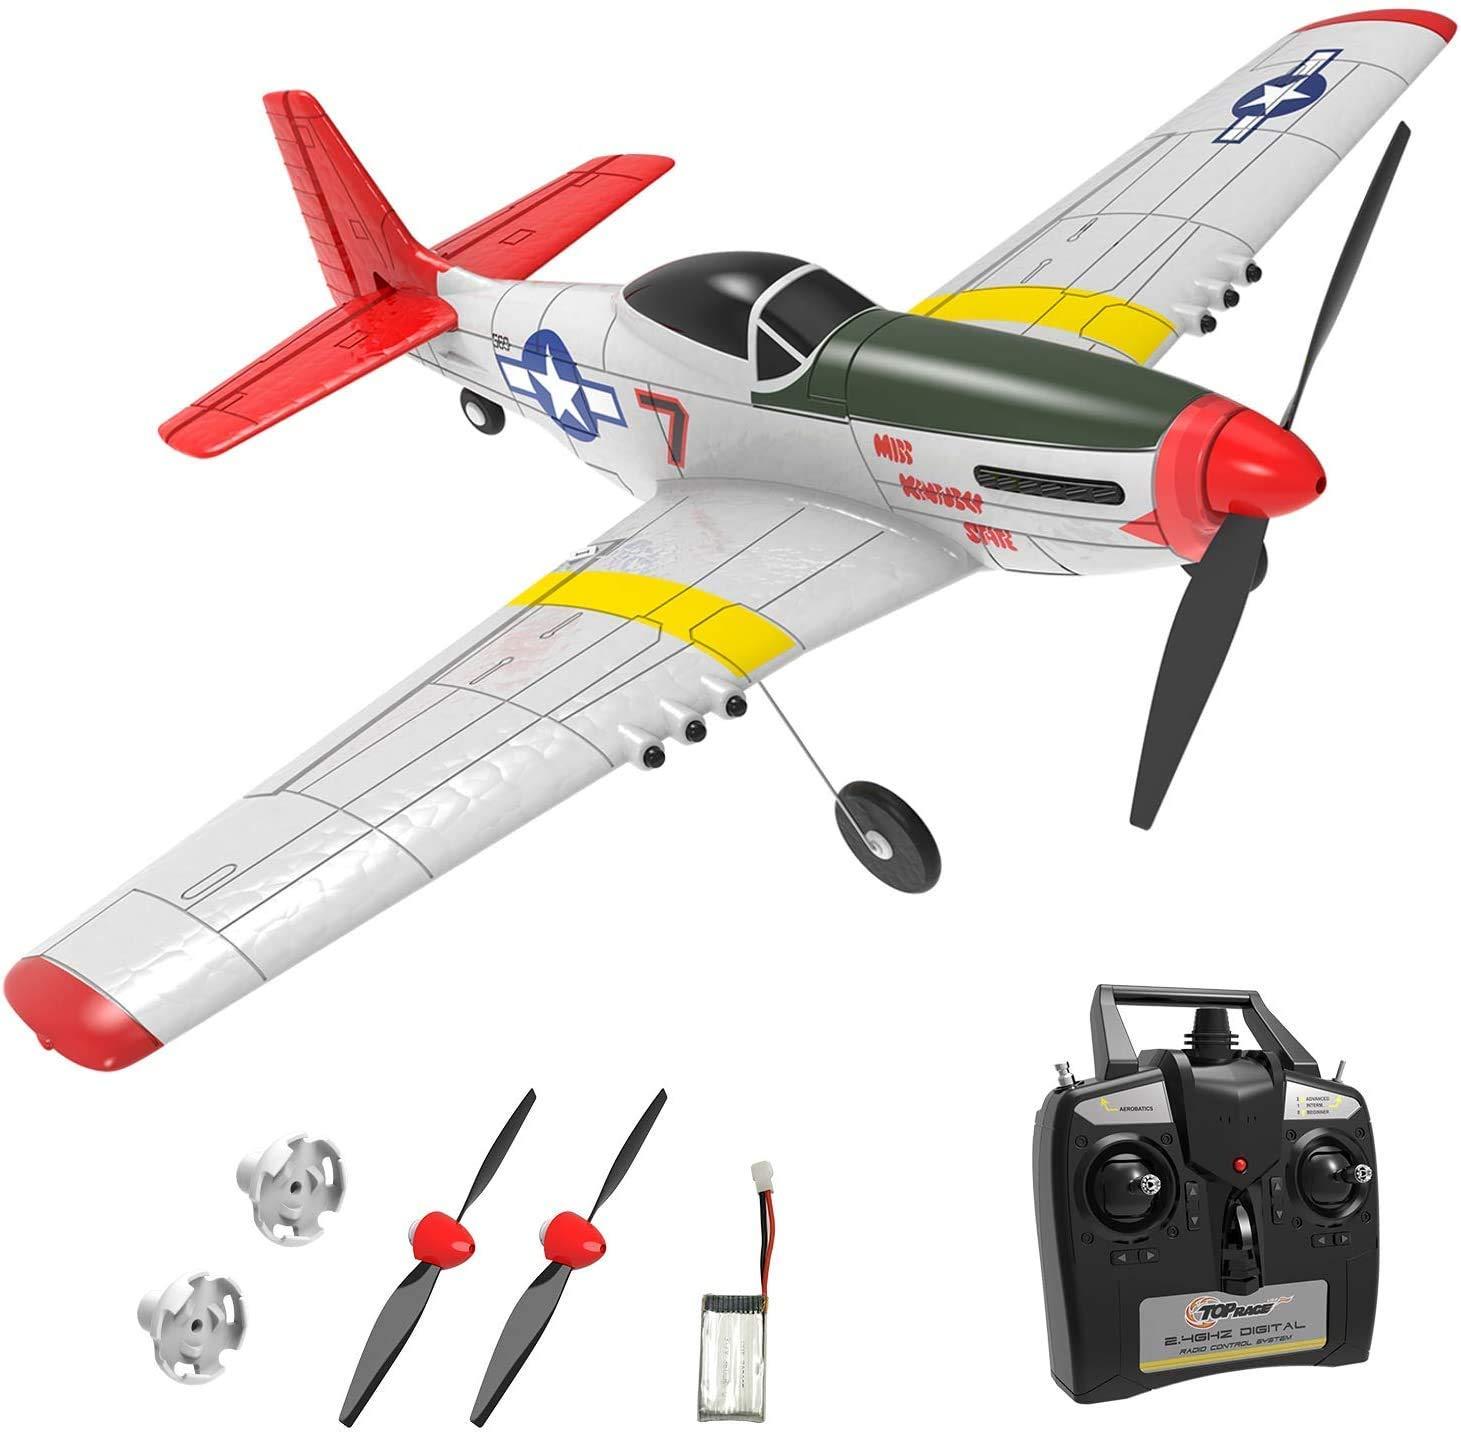 Rc Remote Control Jet: Proper Maintenance and Repair for Long-Lasting RC Jet Performance